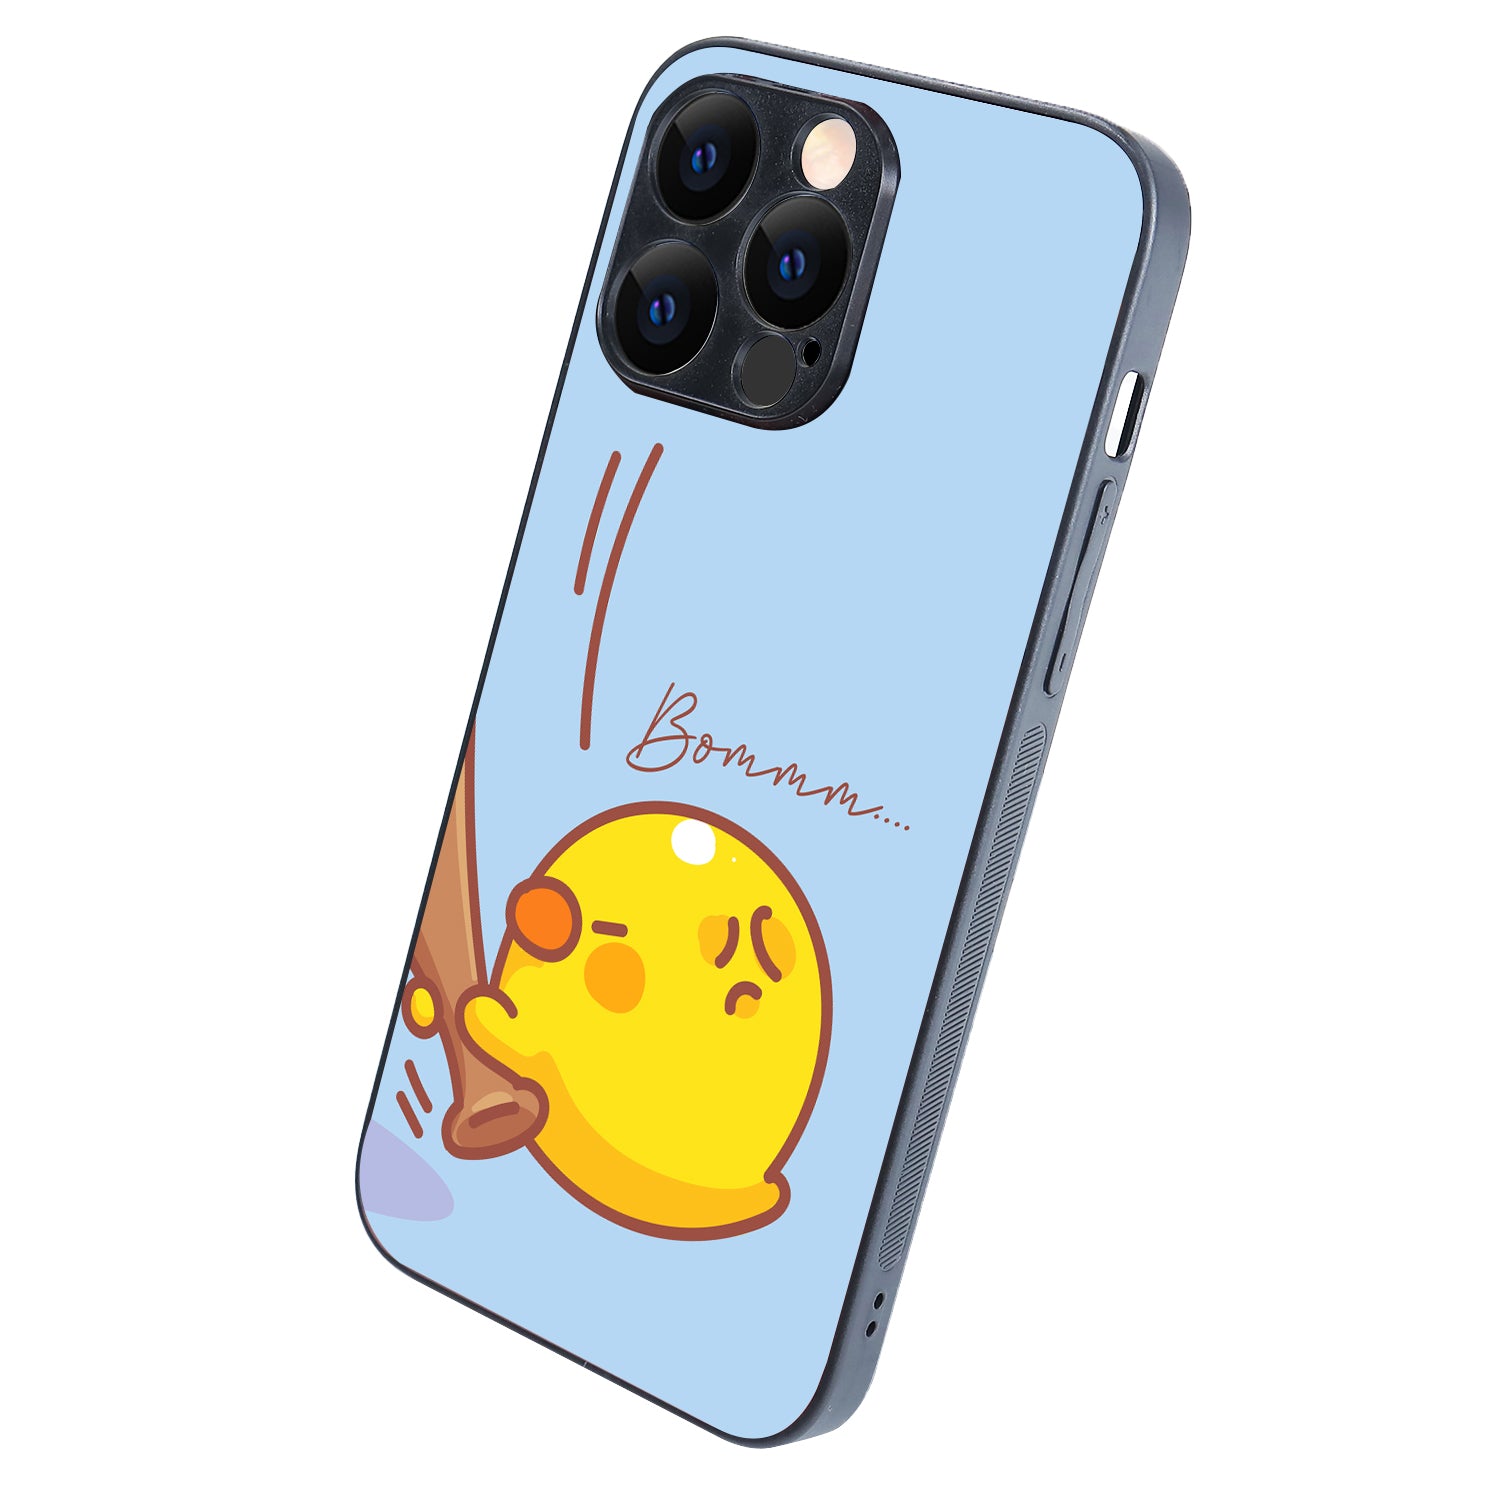 Bomm Cute Bff iPhone 14 Pro Max Case